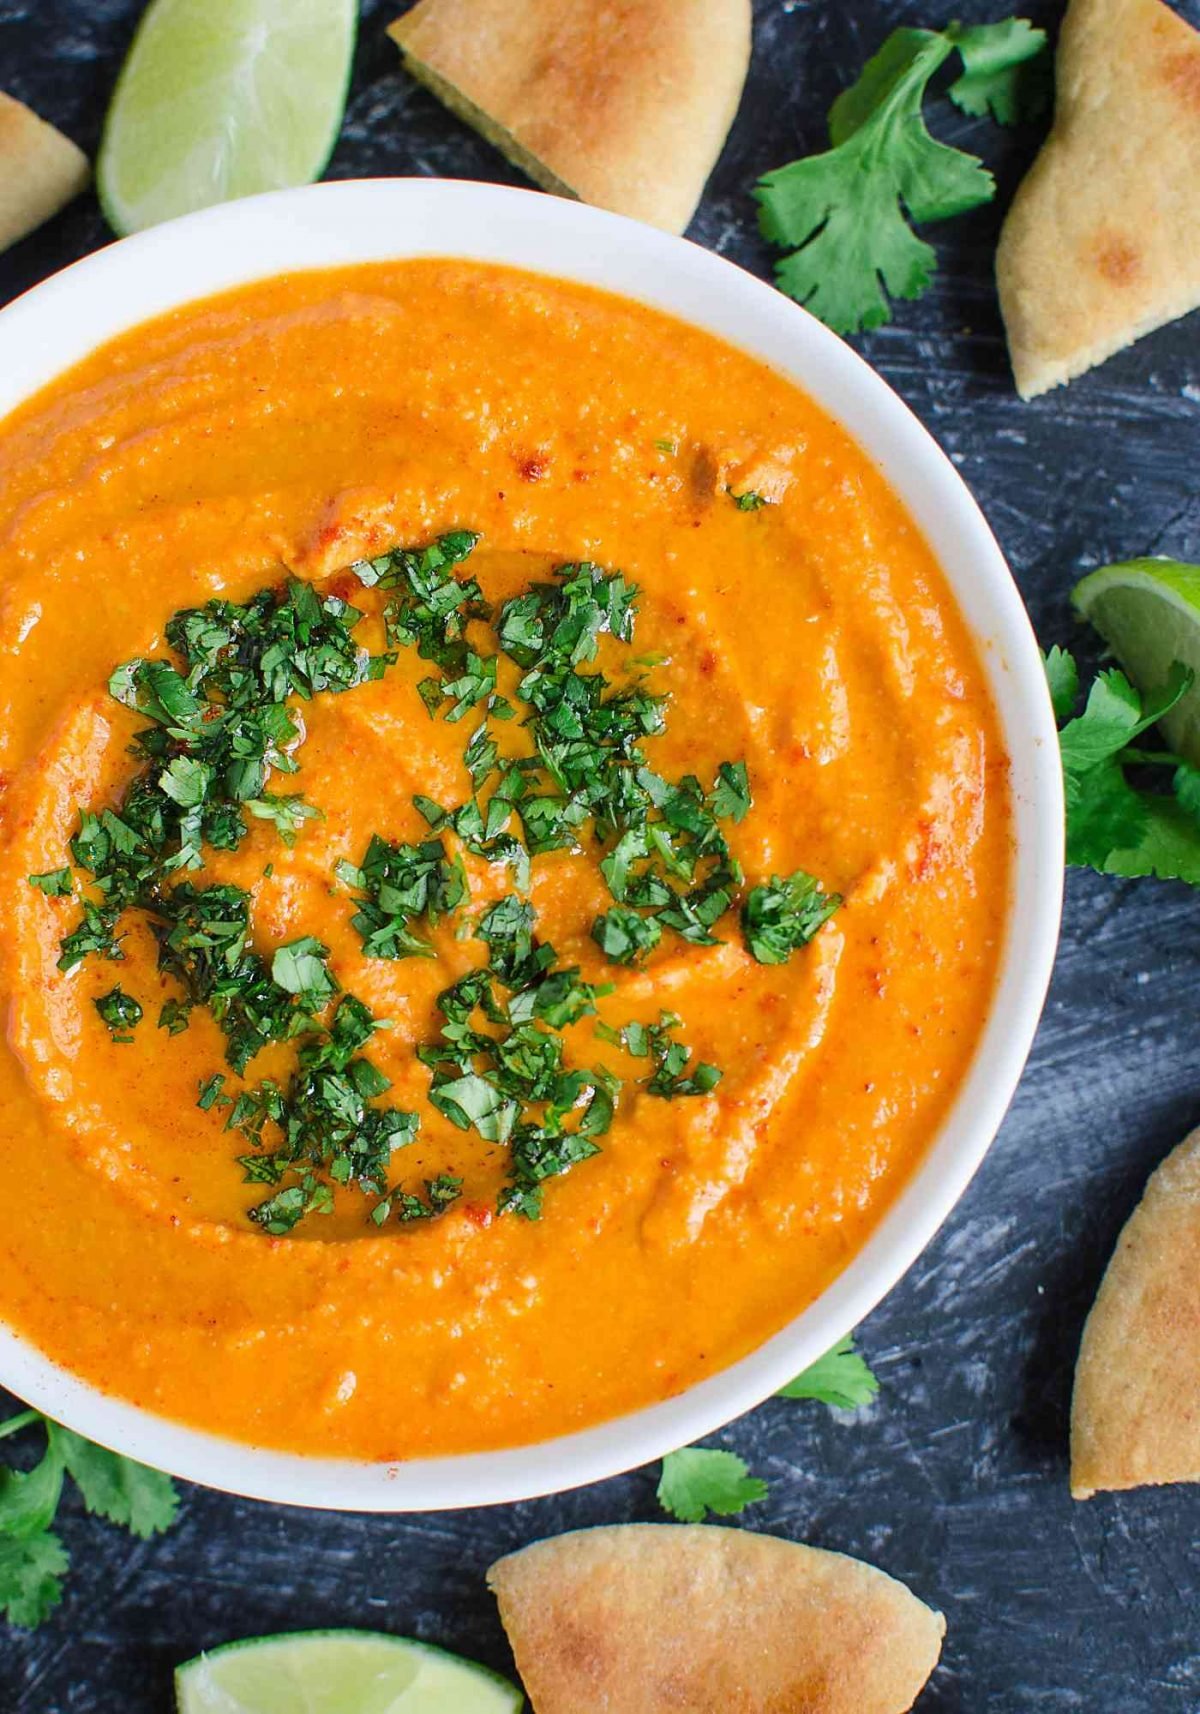 Roasted red pepper hummus - amazingly delicious, creamy and healthy hummus perfect for snacks with pita chips or as a side to any Mediterranean dish. @watchwhatueat